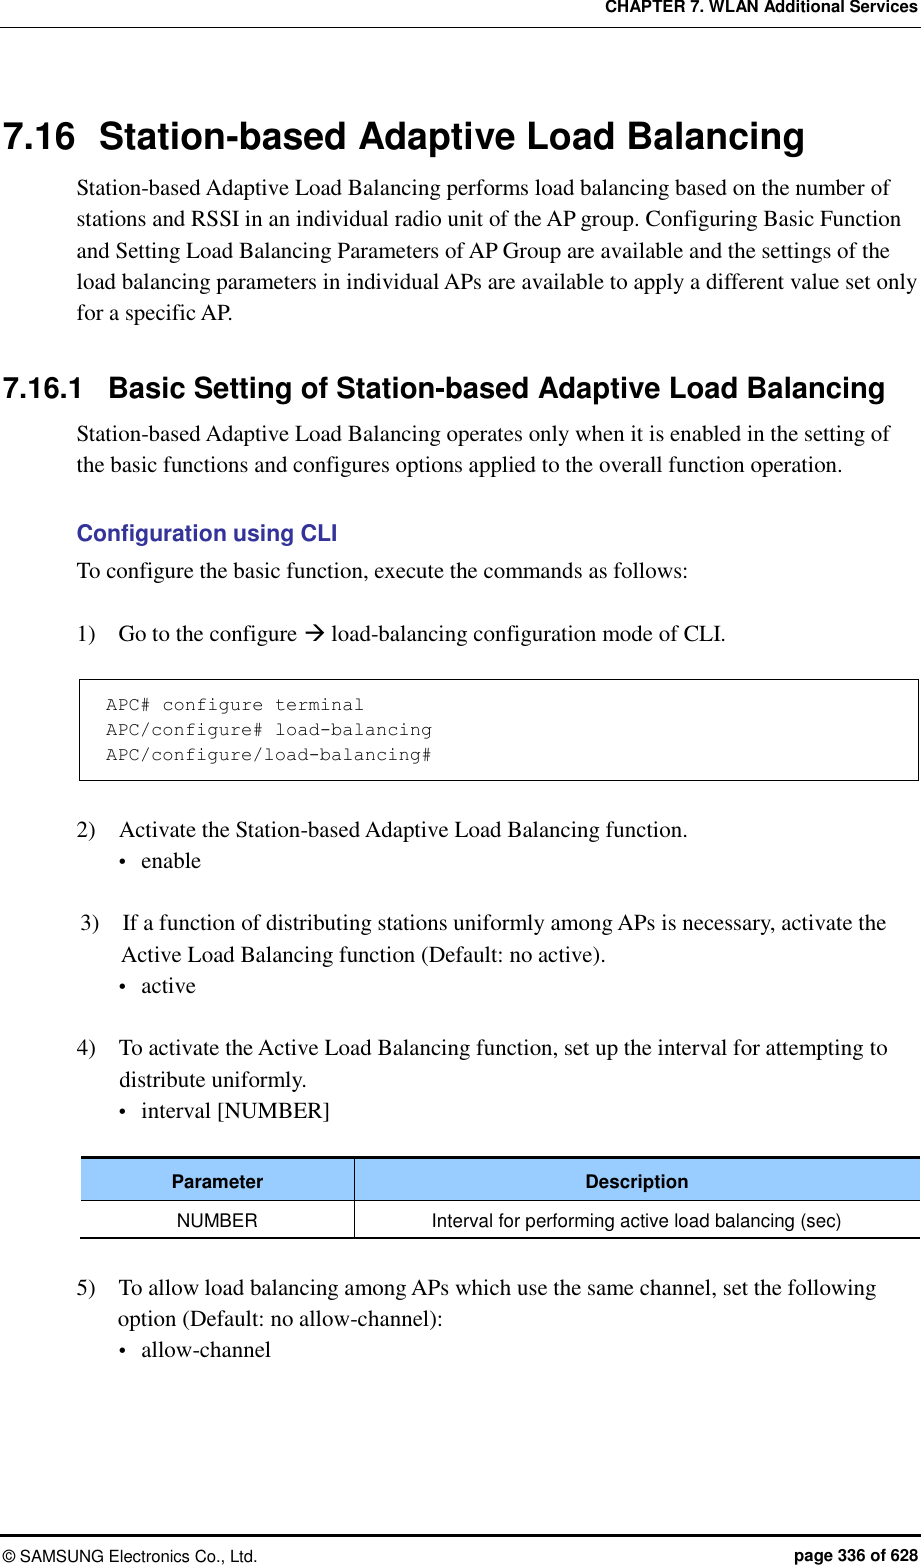 CHAPTER 7. WLAN Additional Services ©  SAMSUNG Electronics Co., Ltd.  page 336 of 628 7.16  Station-based Adaptive Load Balancing Station-based Adaptive Load Balancing performs load balancing based on the number of stations and RSSI in an individual radio unit of the AP group. Configuring Basic Function and Setting Load Balancing Parameters of AP Group are available and the settings of the load balancing parameters in individual APs are available to apply a different value set only for a specific AP.  7.16.1  Basic Setting of Station-based Adaptive Load Balancing Station-based Adaptive Load Balancing operates only when it is enabled in the setting of the basic functions and configures options applied to the overall function operation.  Configuration using CLI To configure the basic function, execute the commands as follows:  1)    Go to the configure  load-balancing configuration mode of CLI.  APC# configure terminal APC/configure# load-balancing APC/configure/load-balancing#  2)    Activate the Station-based Adaptive Load Balancing function.  enable  3)    If a function of distributing stations uniformly among APs is necessary, activate the Active Load Balancing function (Default: no active).  active  4)    To activate the Active Load Balancing function, set up the interval for attempting to distribute uniformly.  interval [NUMBER]  Parameter Description NUMBER Interval for performing active load balancing (sec)  5)    To allow load balancing among APs which use the same channel, set the following option (Default: no allow-channel):  allow-channel  